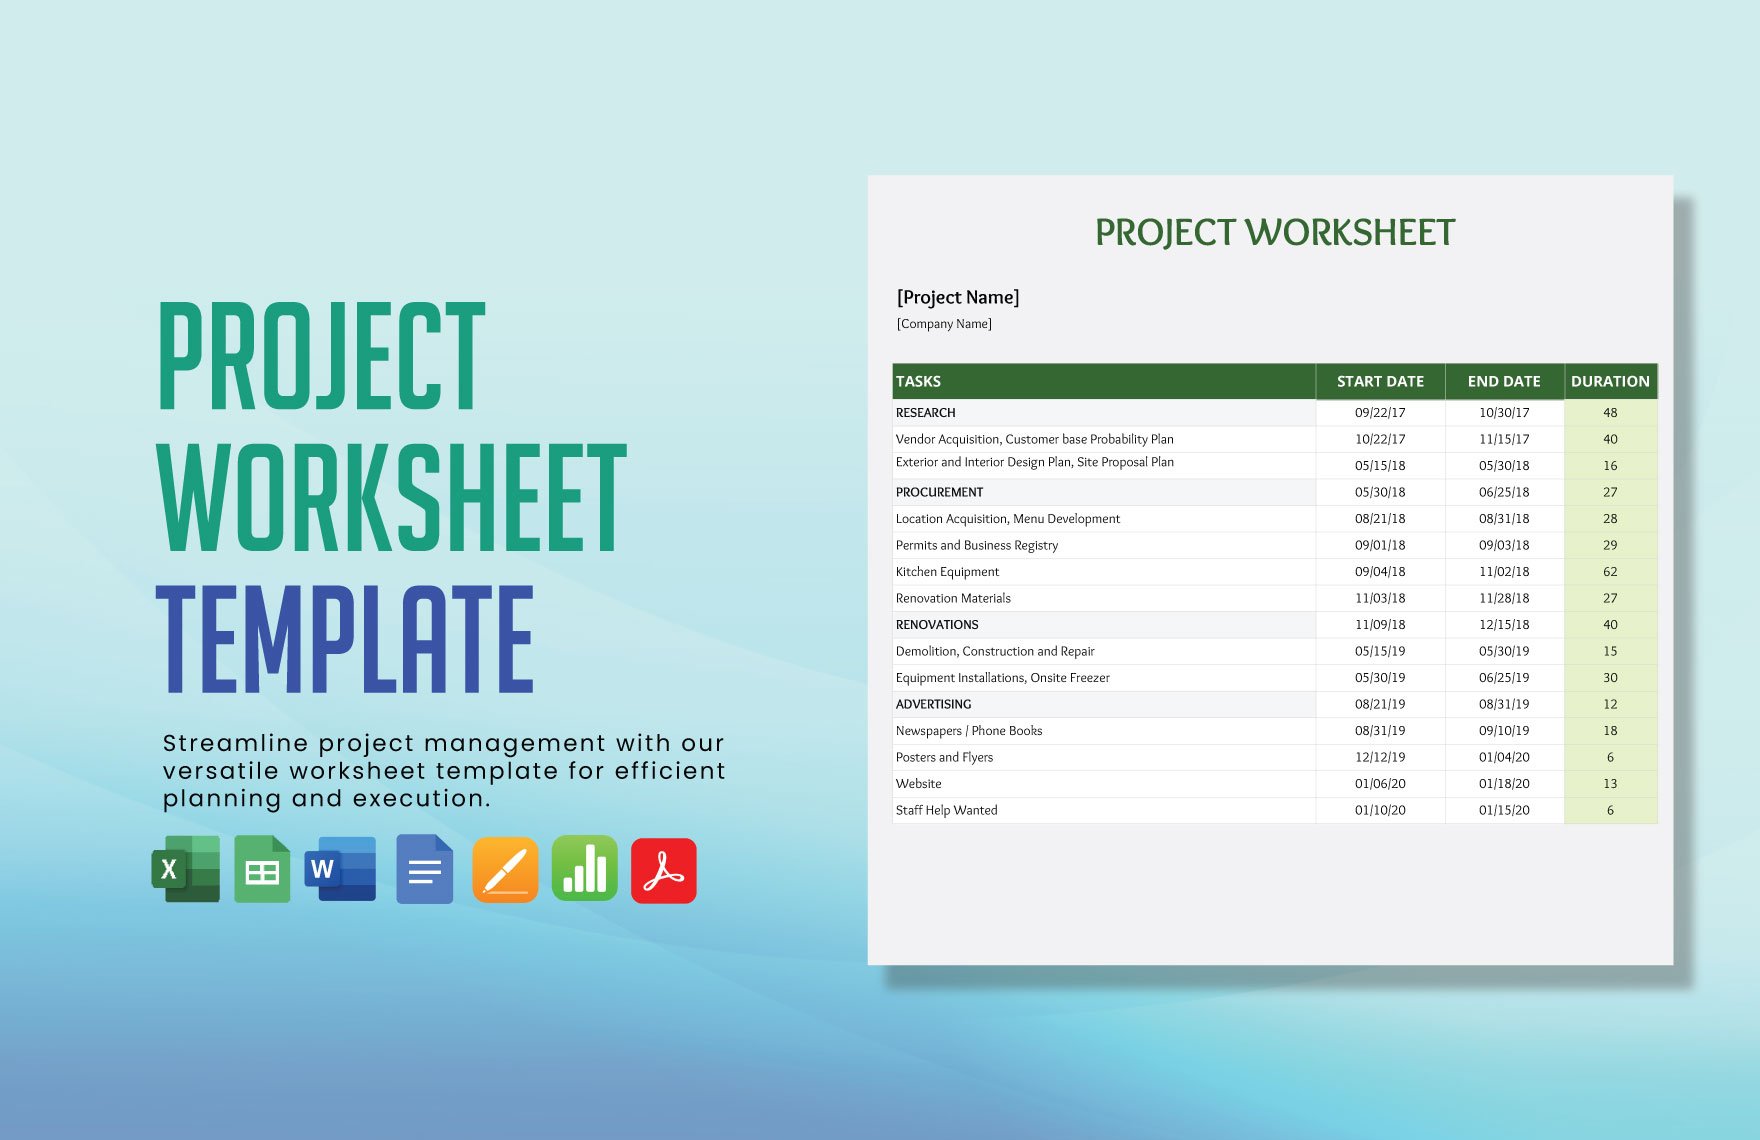 Project Worksheet Template in Word, Google Docs, Excel, PDF, Google Sheets, Apple Pages, Apple Numbers